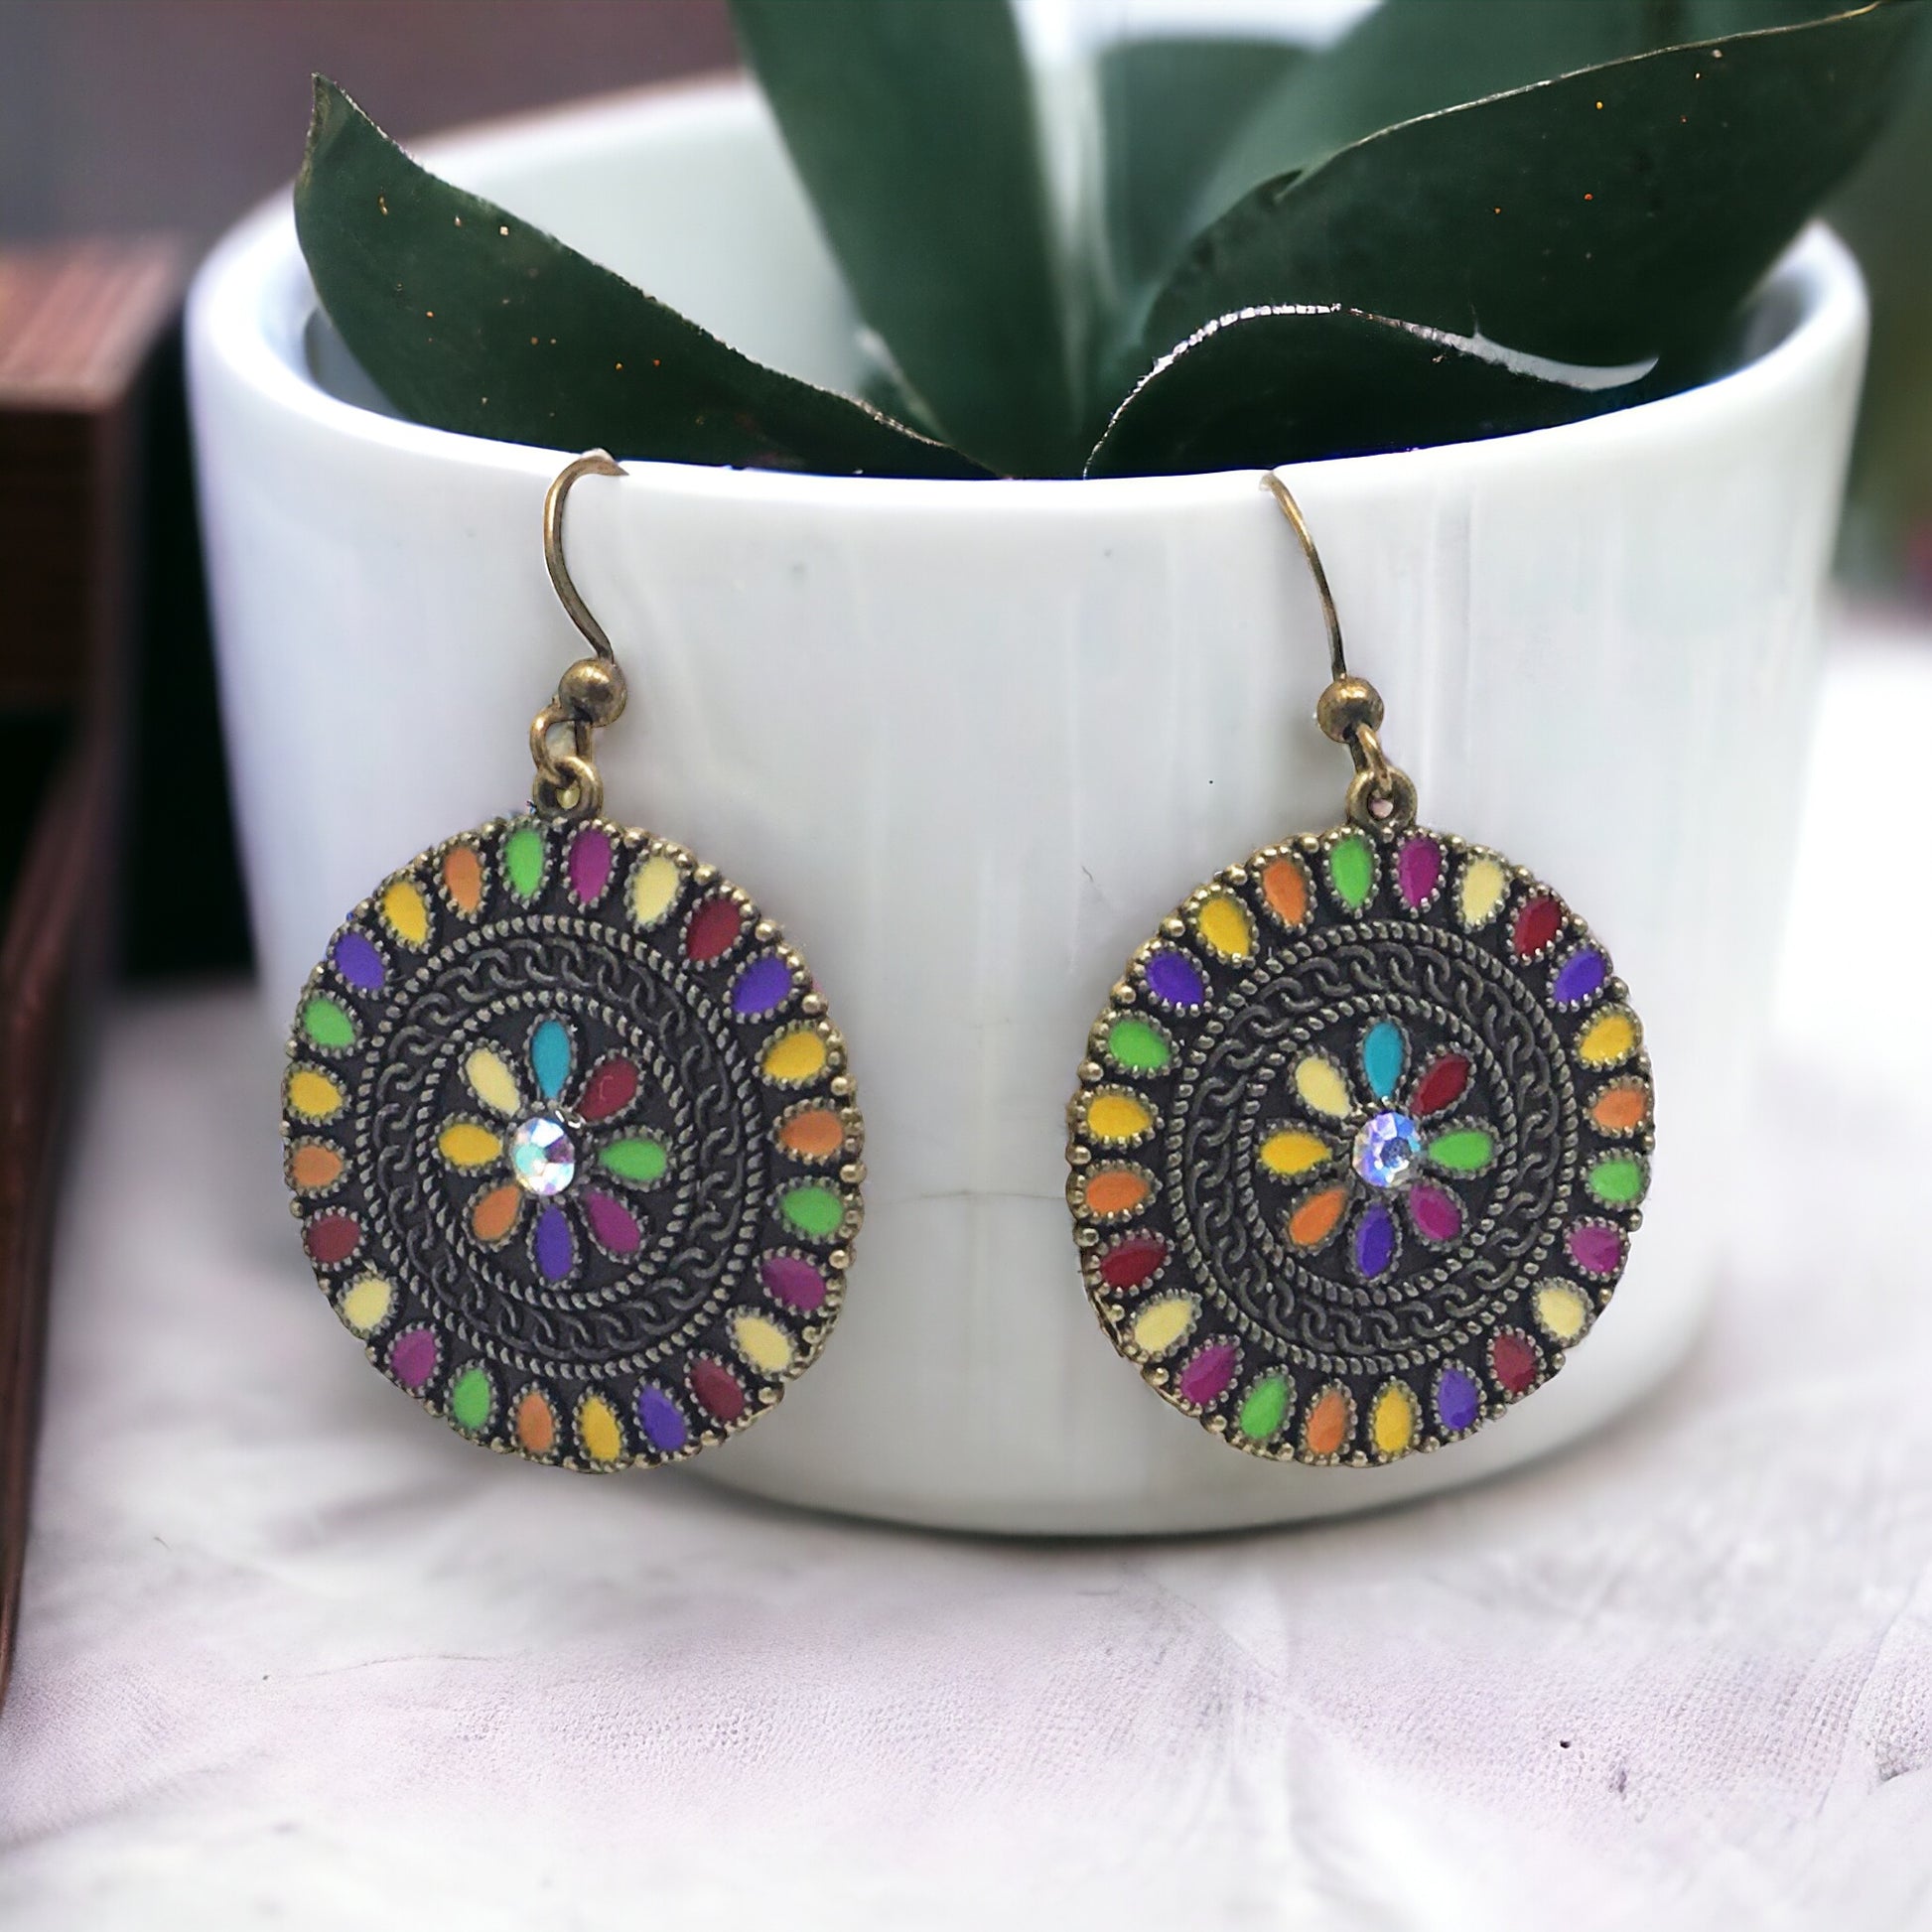 Colorful Round Floral Dangle Earrings with Rhinestone Accents - Stylish & Sparkling Accessories